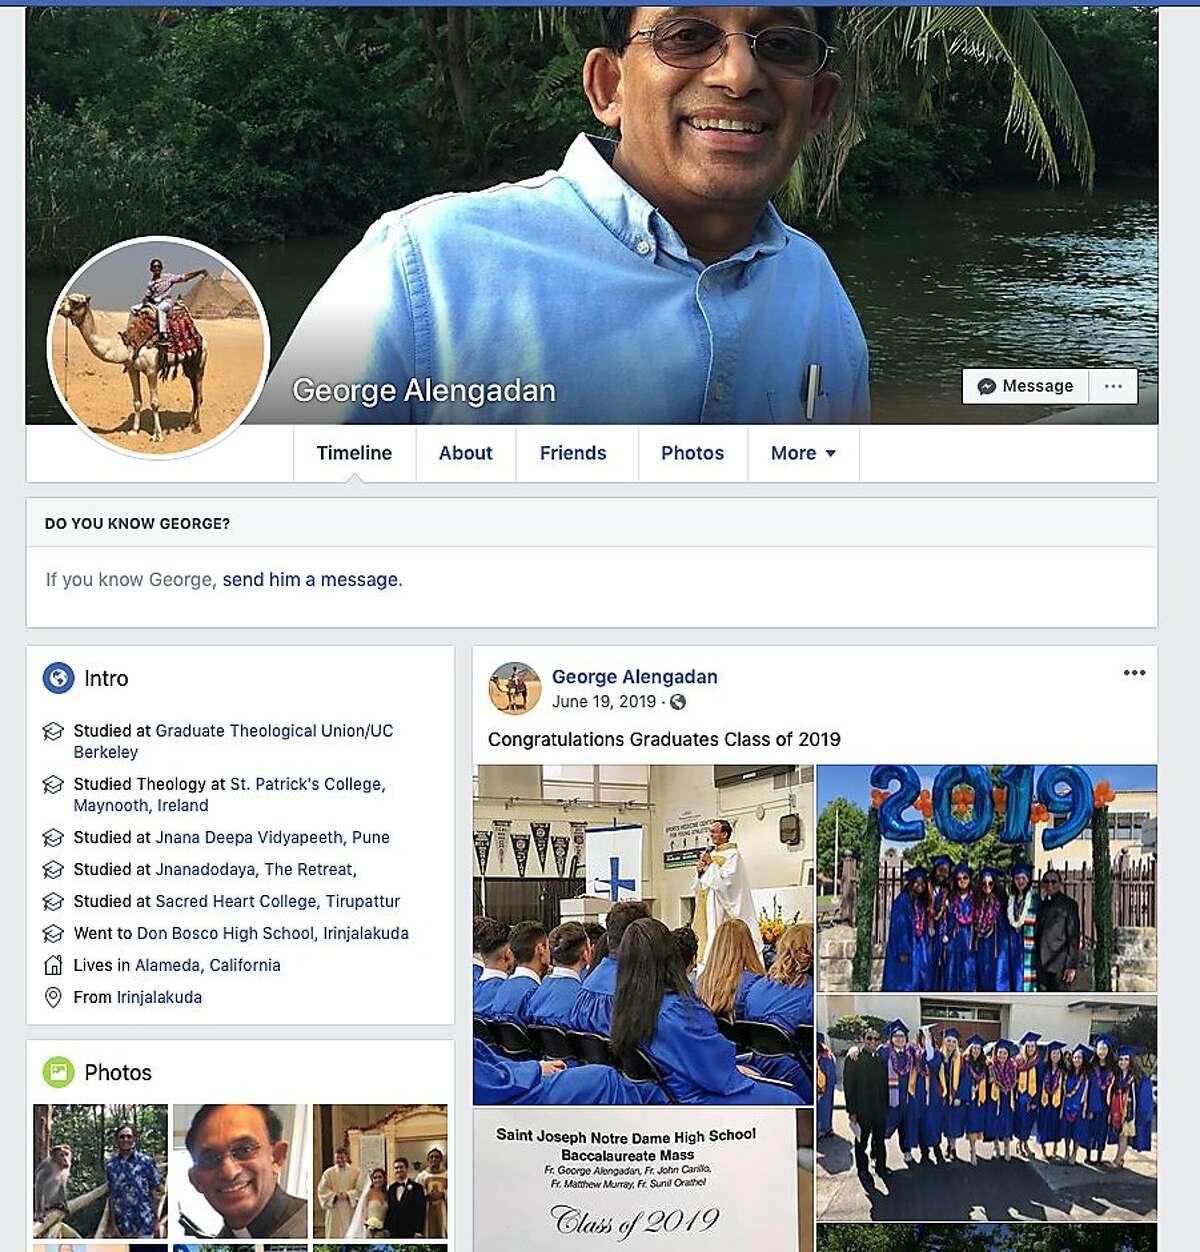 Pictured is the Facebook page of Father George Alengaden, who was reported to police by the Catholic Diocese of Oakland for allegedly sexually harassing a number of employees at St. Joseph Basilica. The diocese ordered the priest to participate in training and receive support at Christ the King Church in Pleasant Hill, upsetting members of the parish when they learned of his past history.